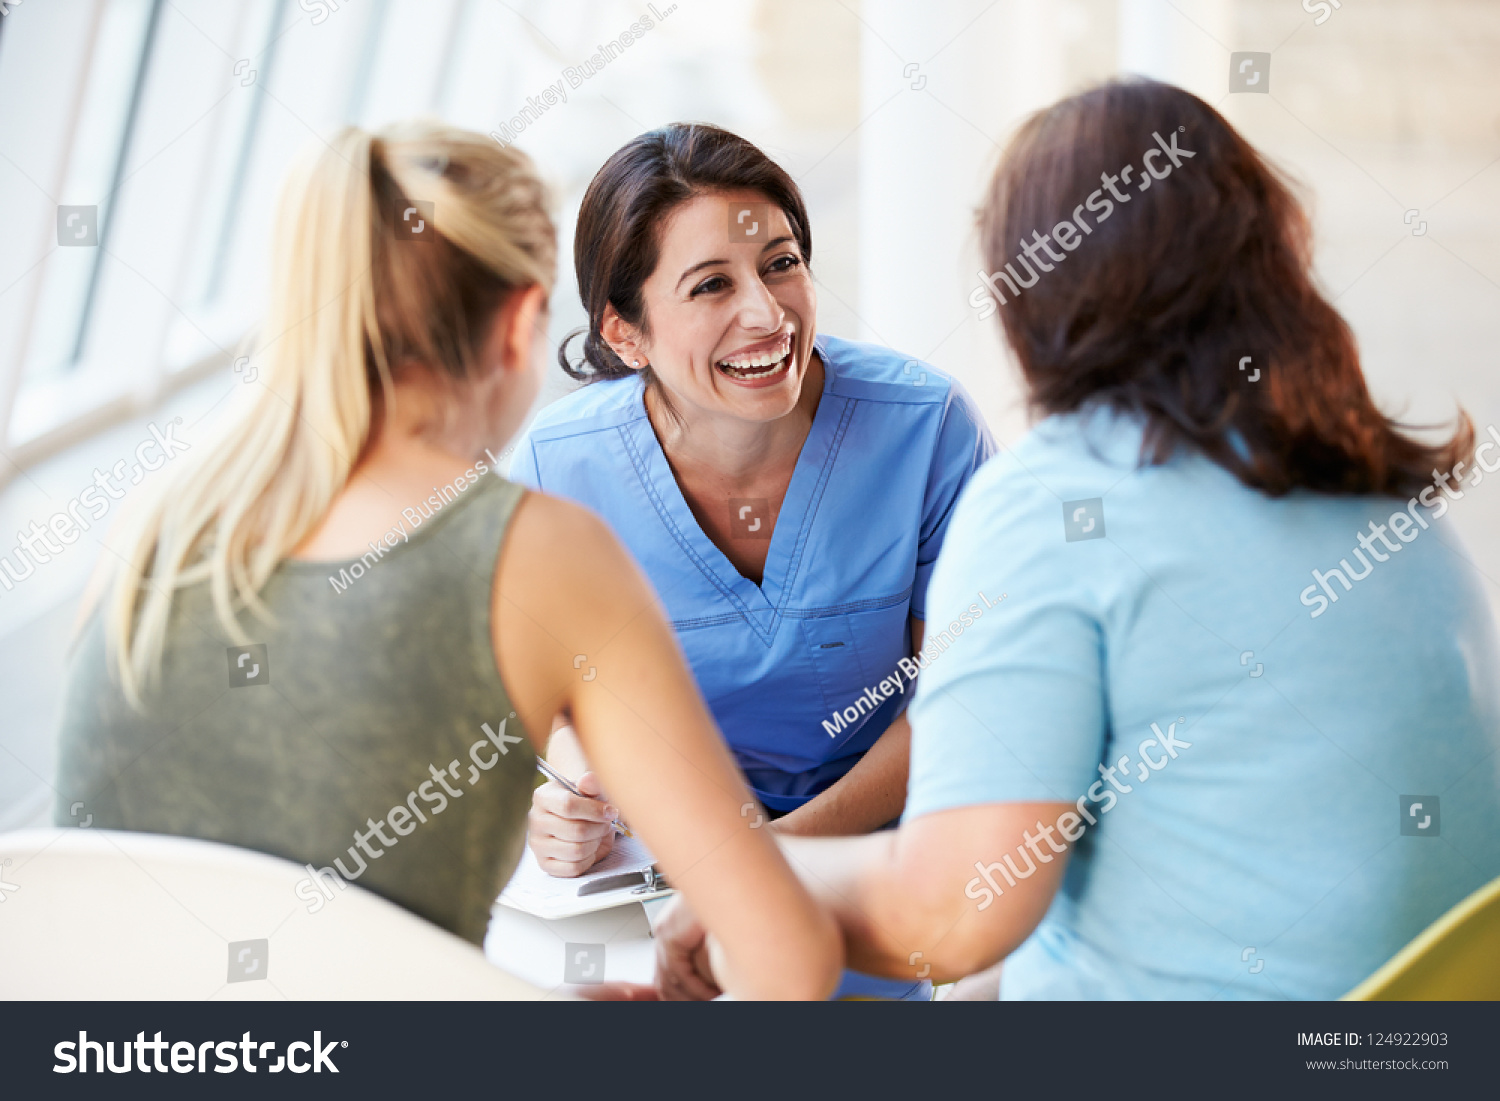 Nurse Meeting With Teenage Girl And Mother In Hospital #124922903